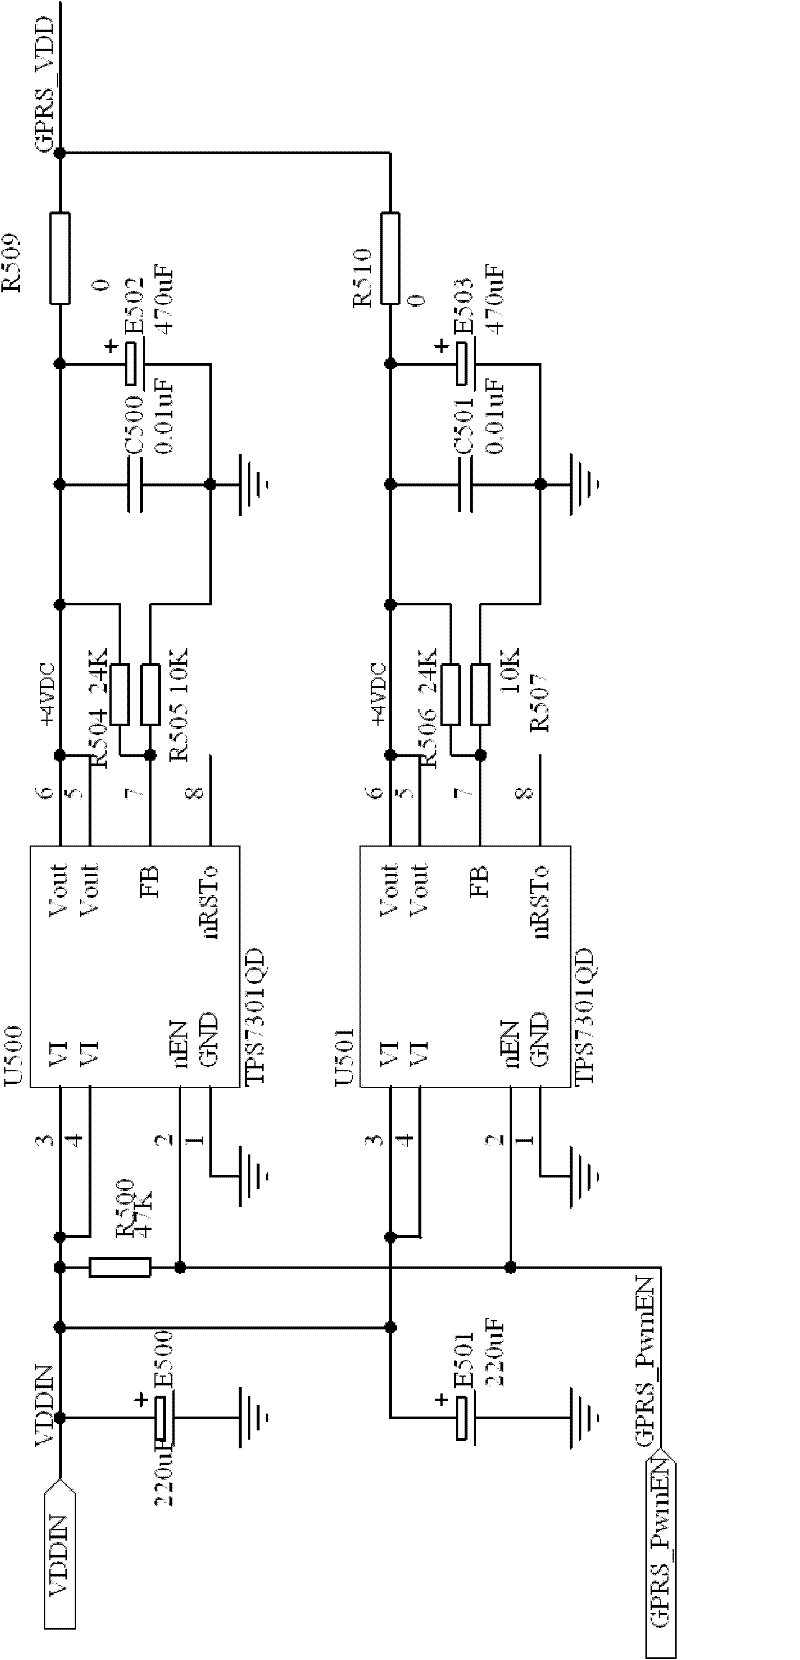 Power supply control system of field on-line monitoring device